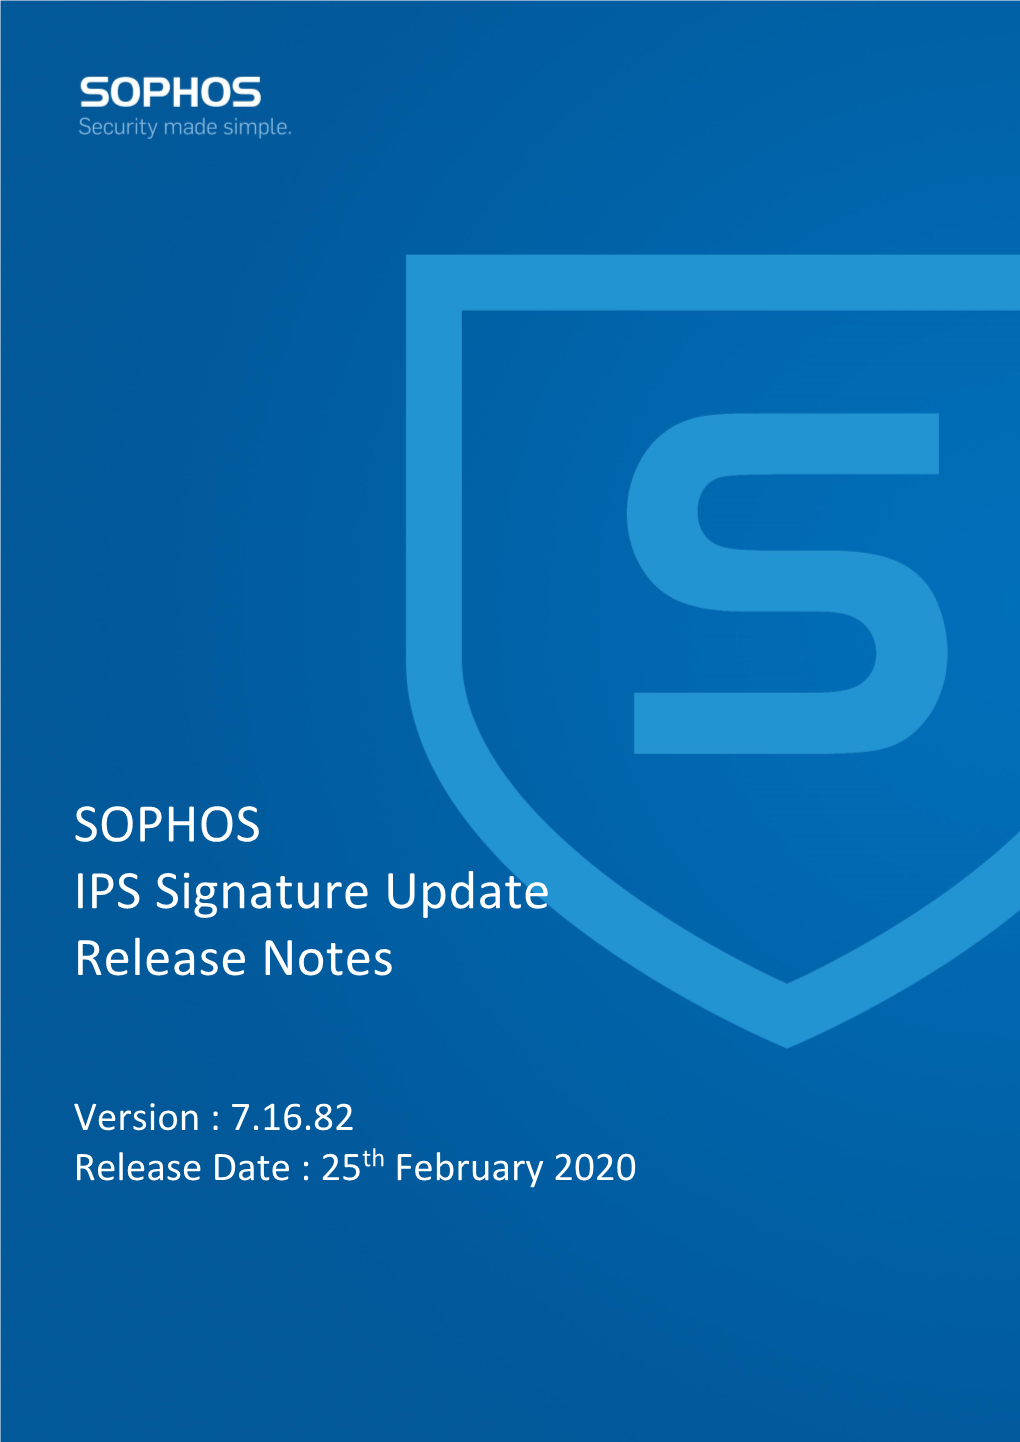 IPS Signature Release Note V7.16.82